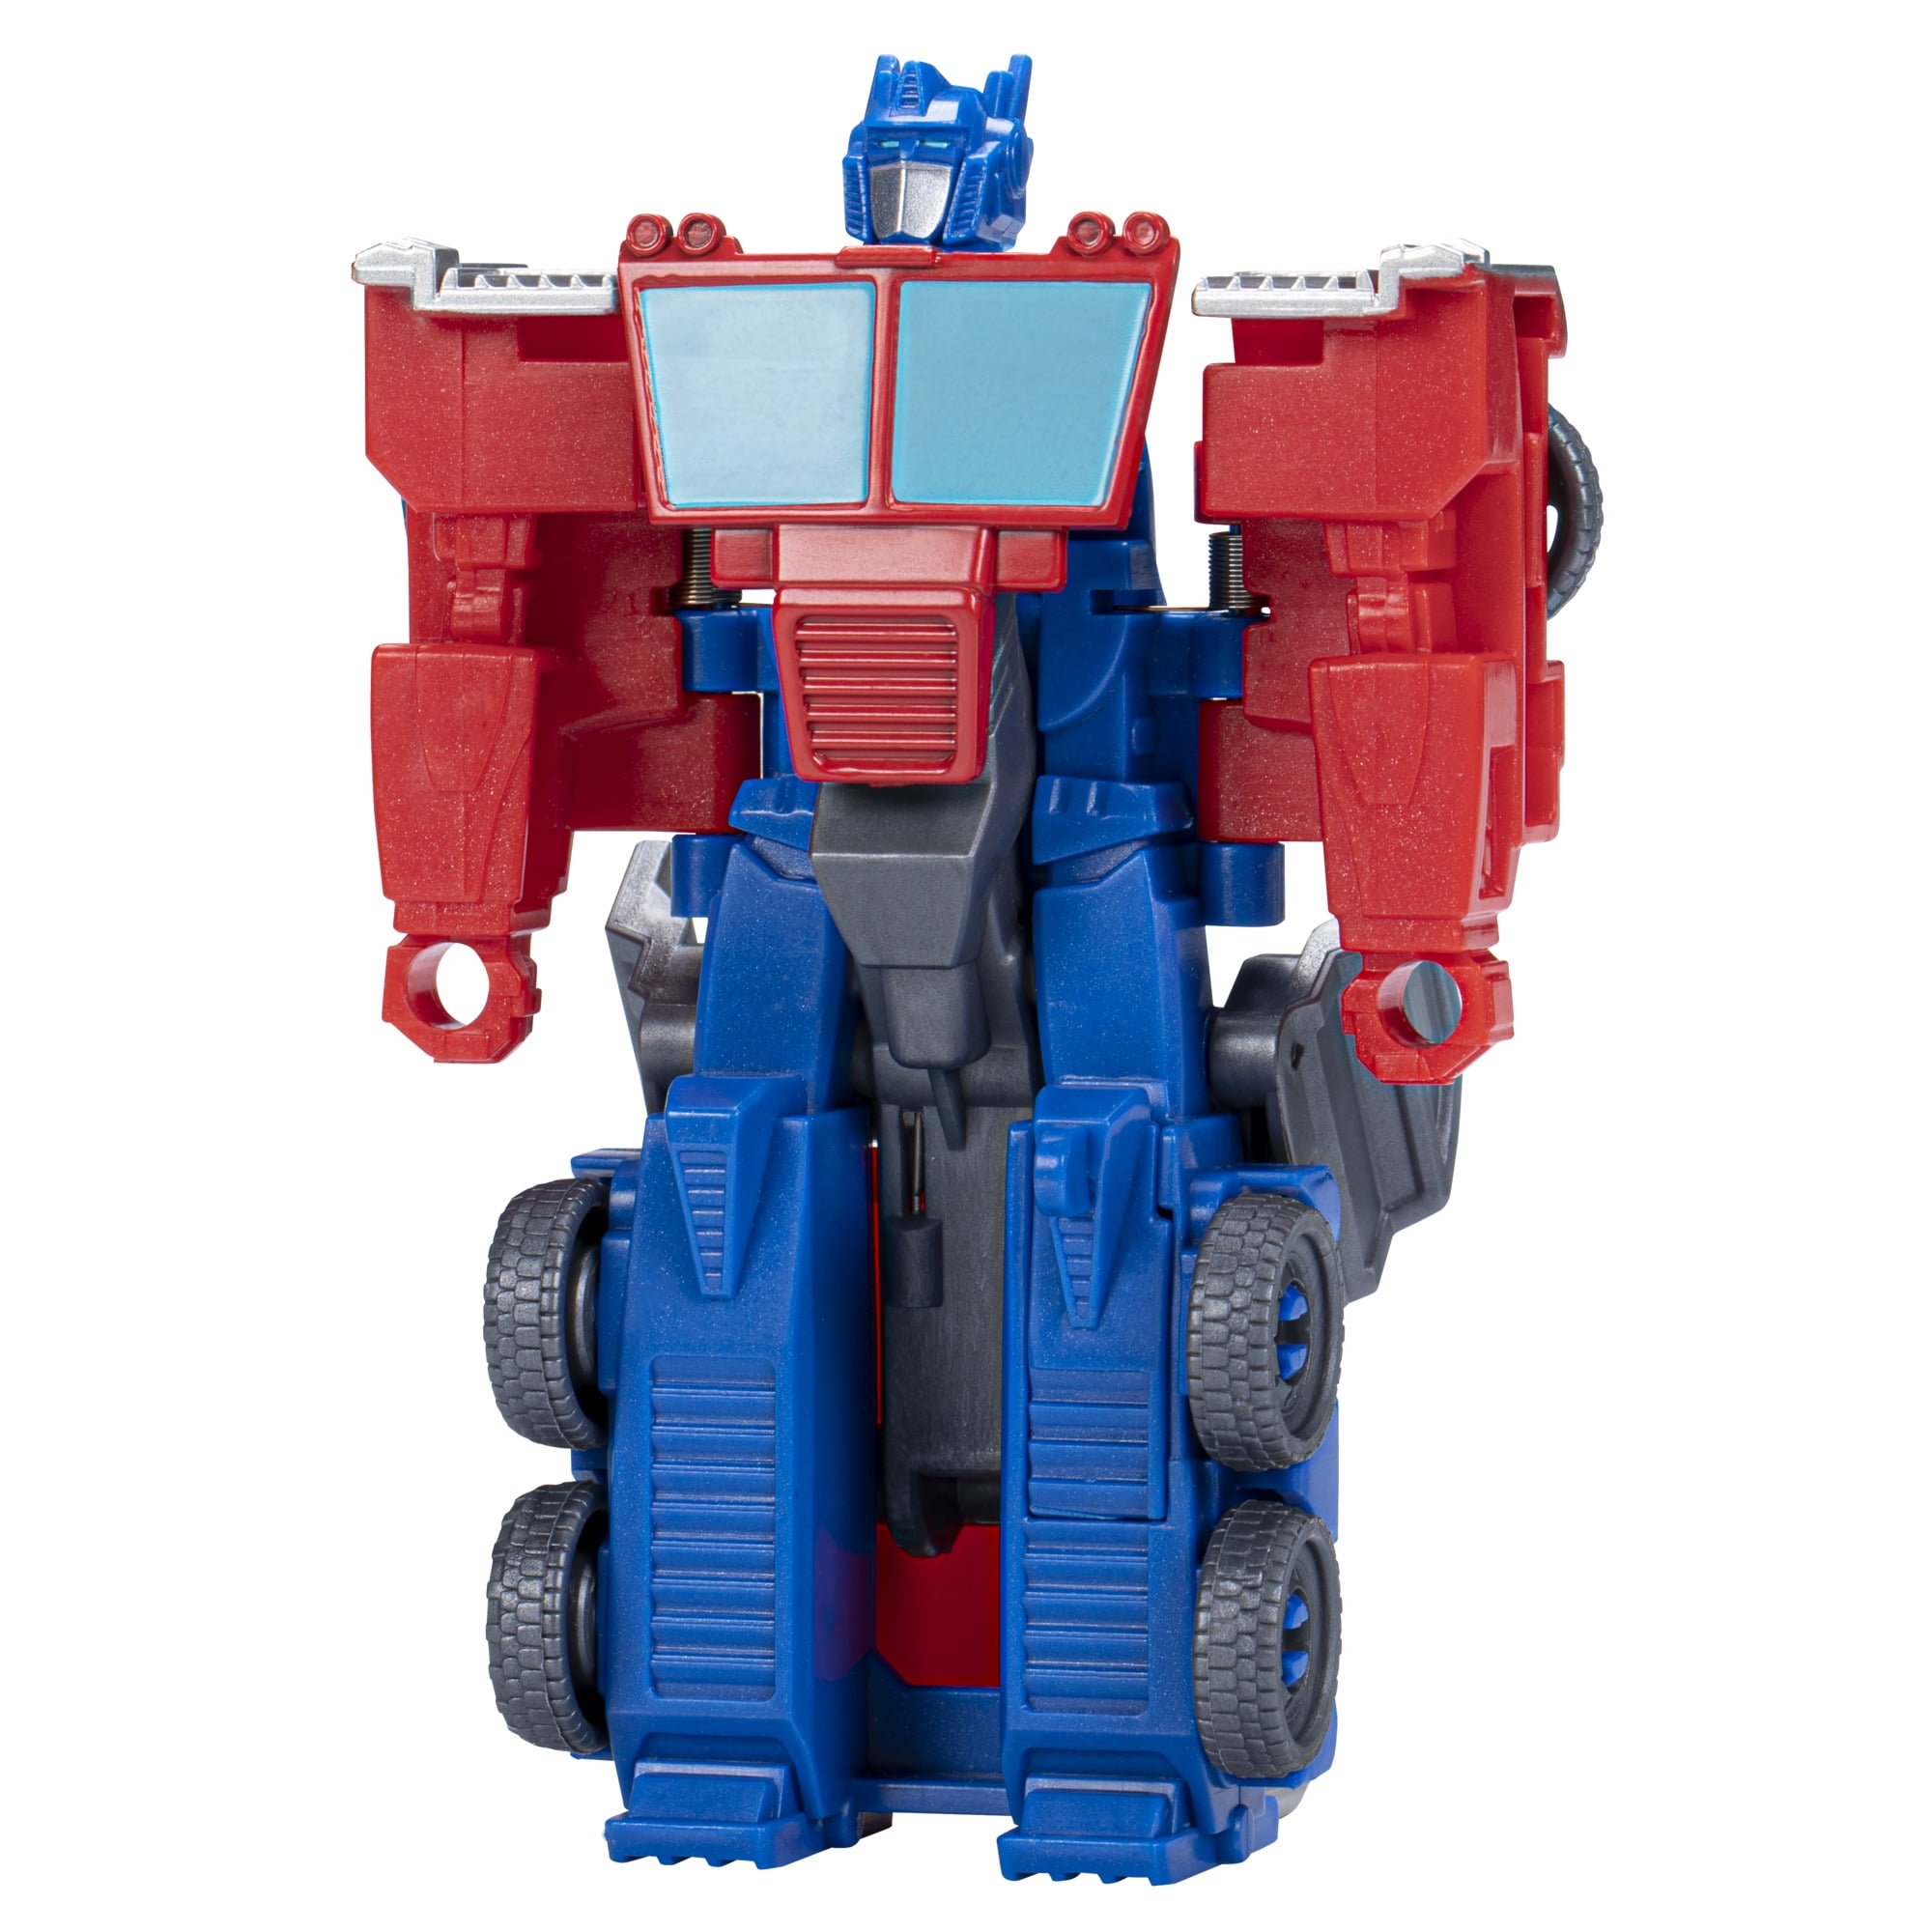 YOLOPARK Optimus Primte Transformer Toy Model Kit｜Transformers The Movie 7  Rise of the Beasts 7.87in Transformer Optimus Prime Action Figures